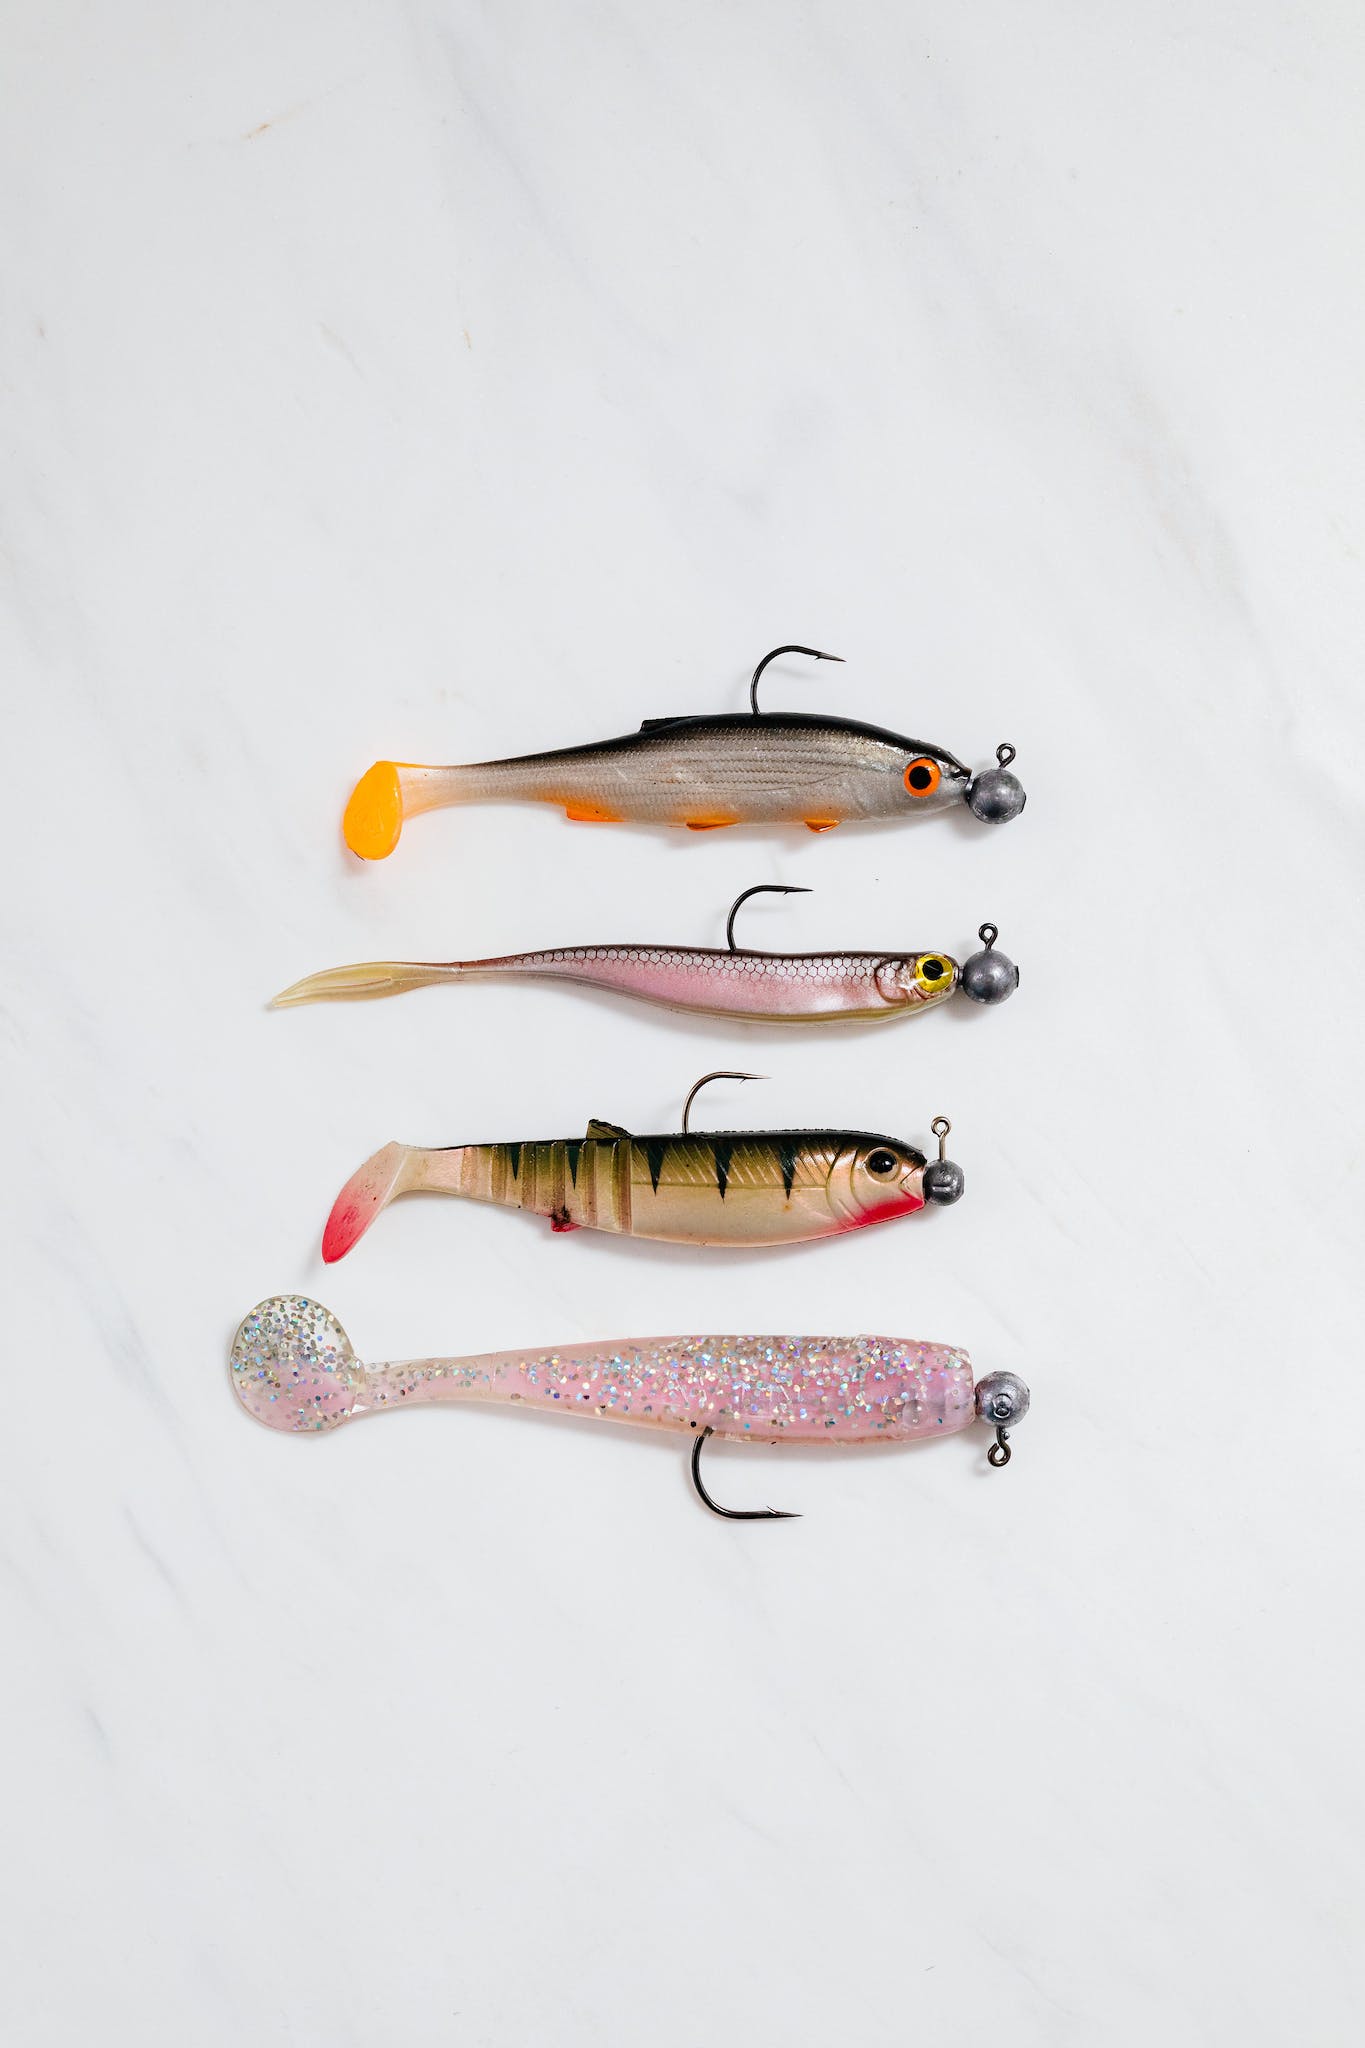 Close-up Photo of Fishing Lures